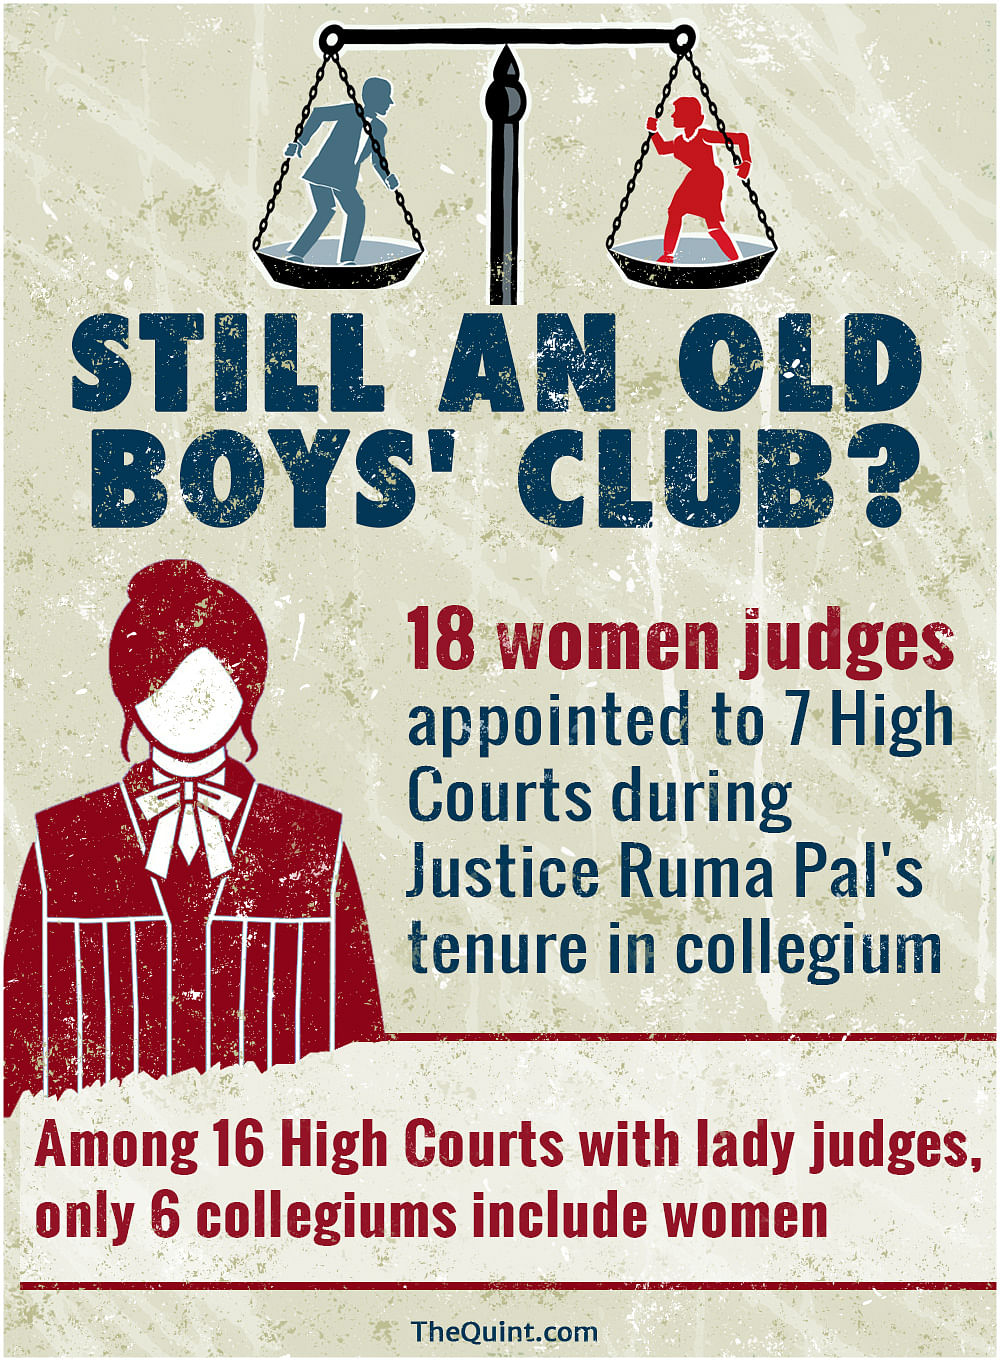 There is a desperate need to appoint more women judges & for giving them a significant say in judges’ appointment.